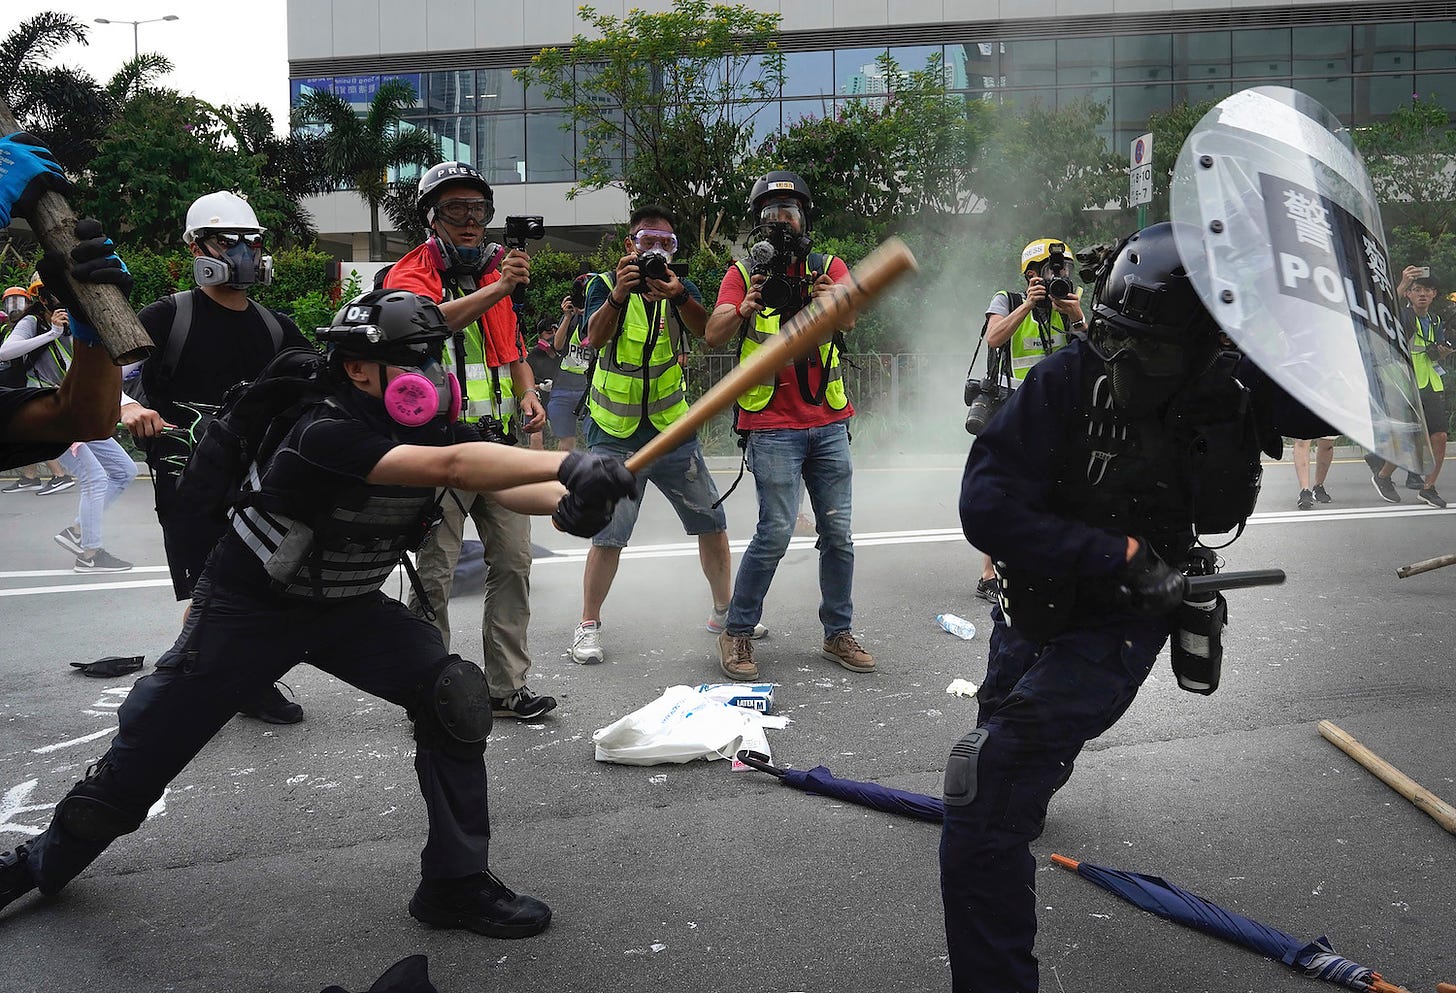 Violence returns as protesters taunt HK police